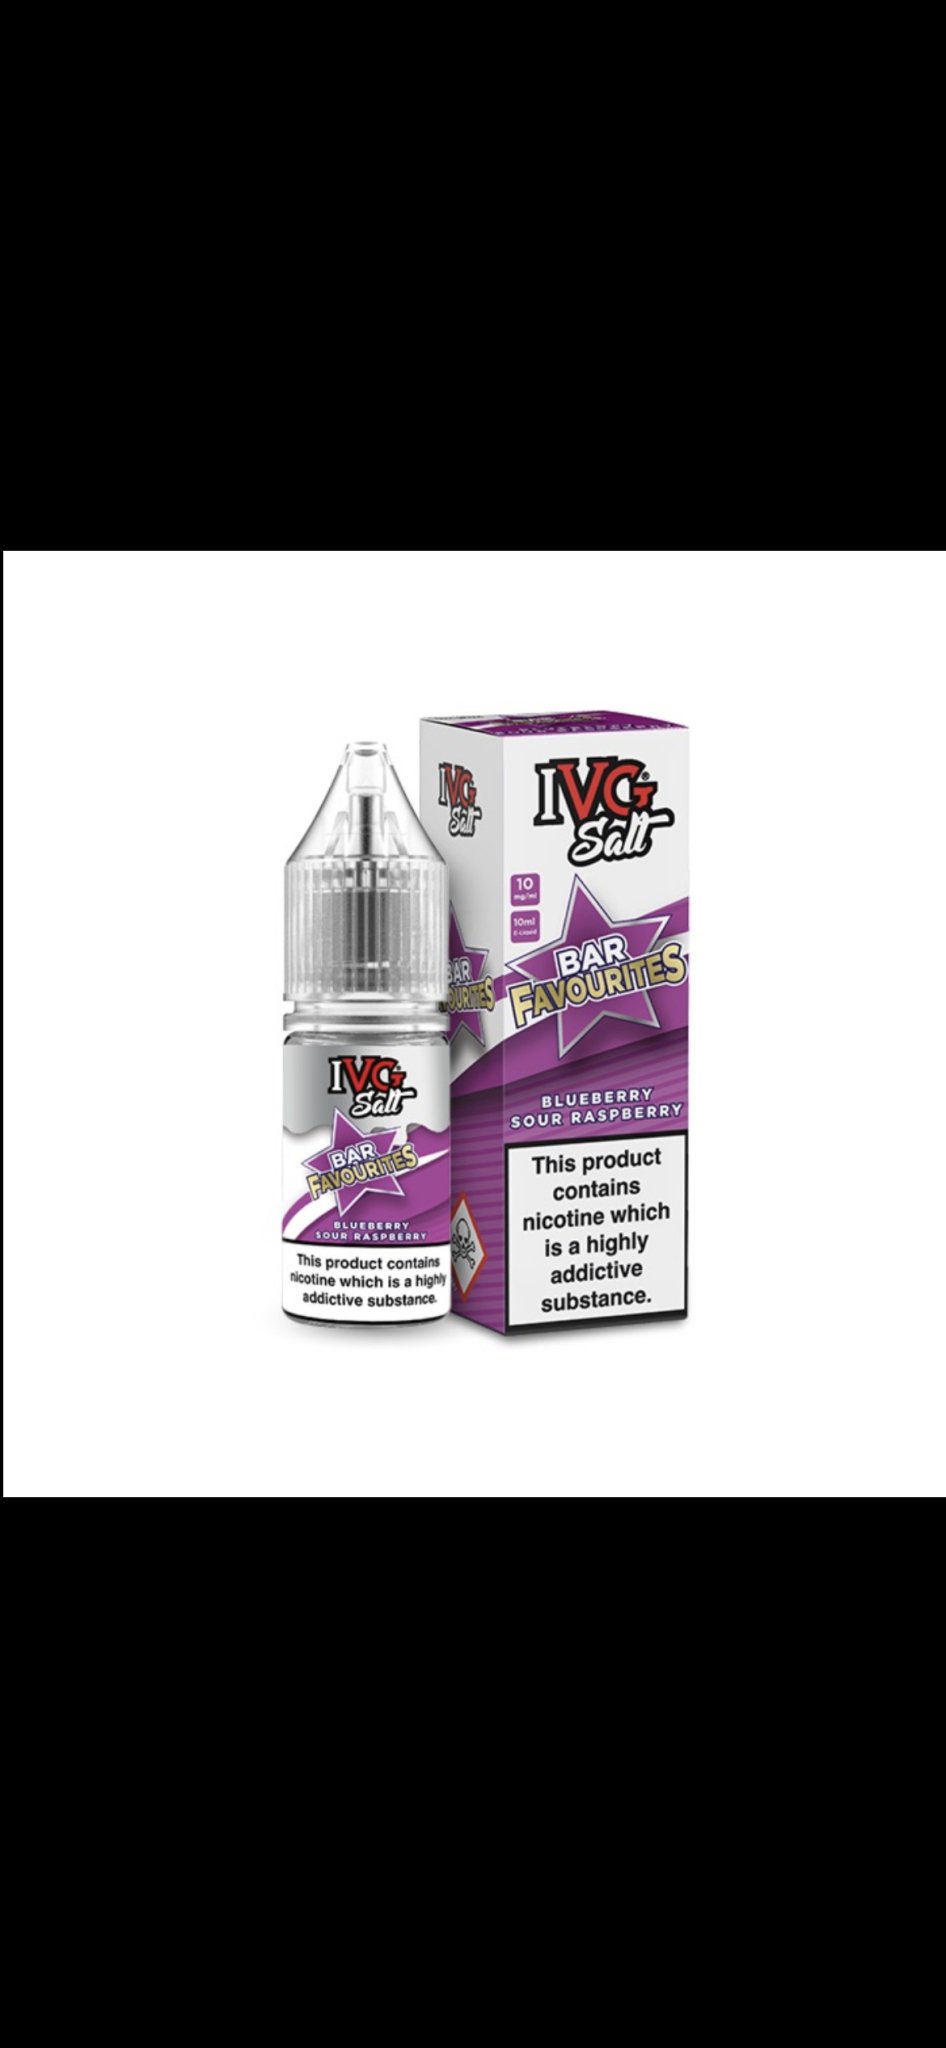 IVG Bar Favourites Blueberry Sour Raspberry 20mg - EUK